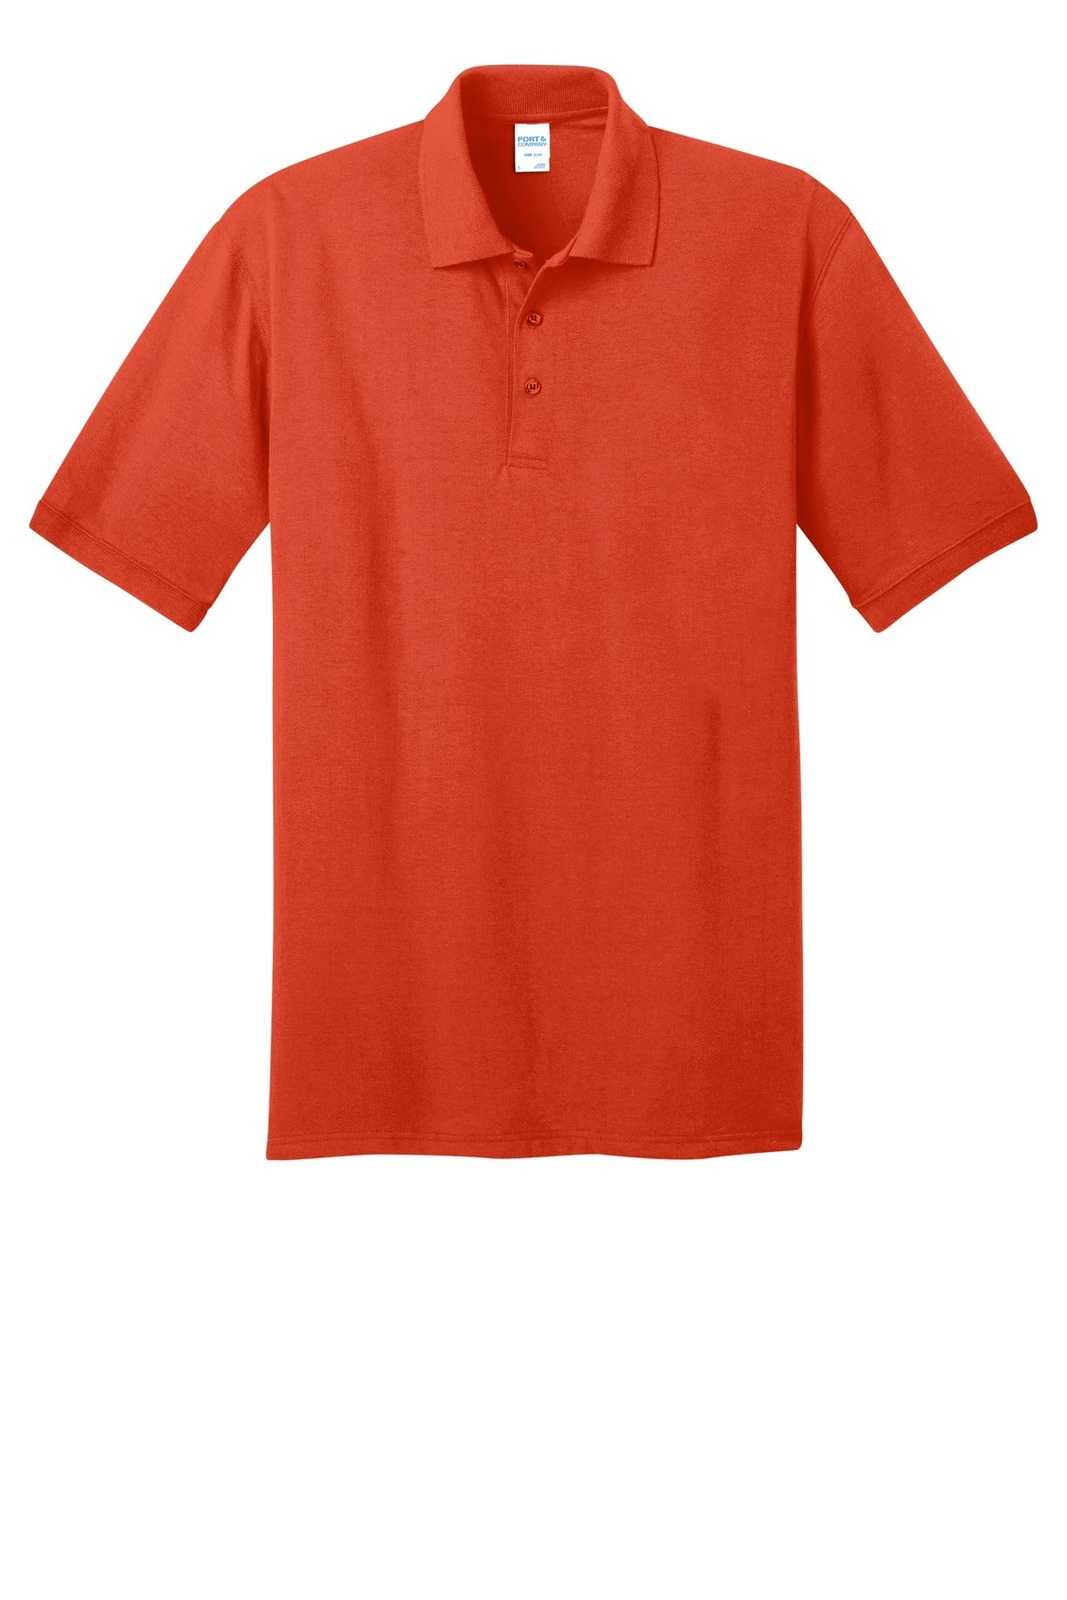 Port &amp; Company KP55T Tall Core Blend Jersey Knit Polo - Orange - HIT a Double - 2